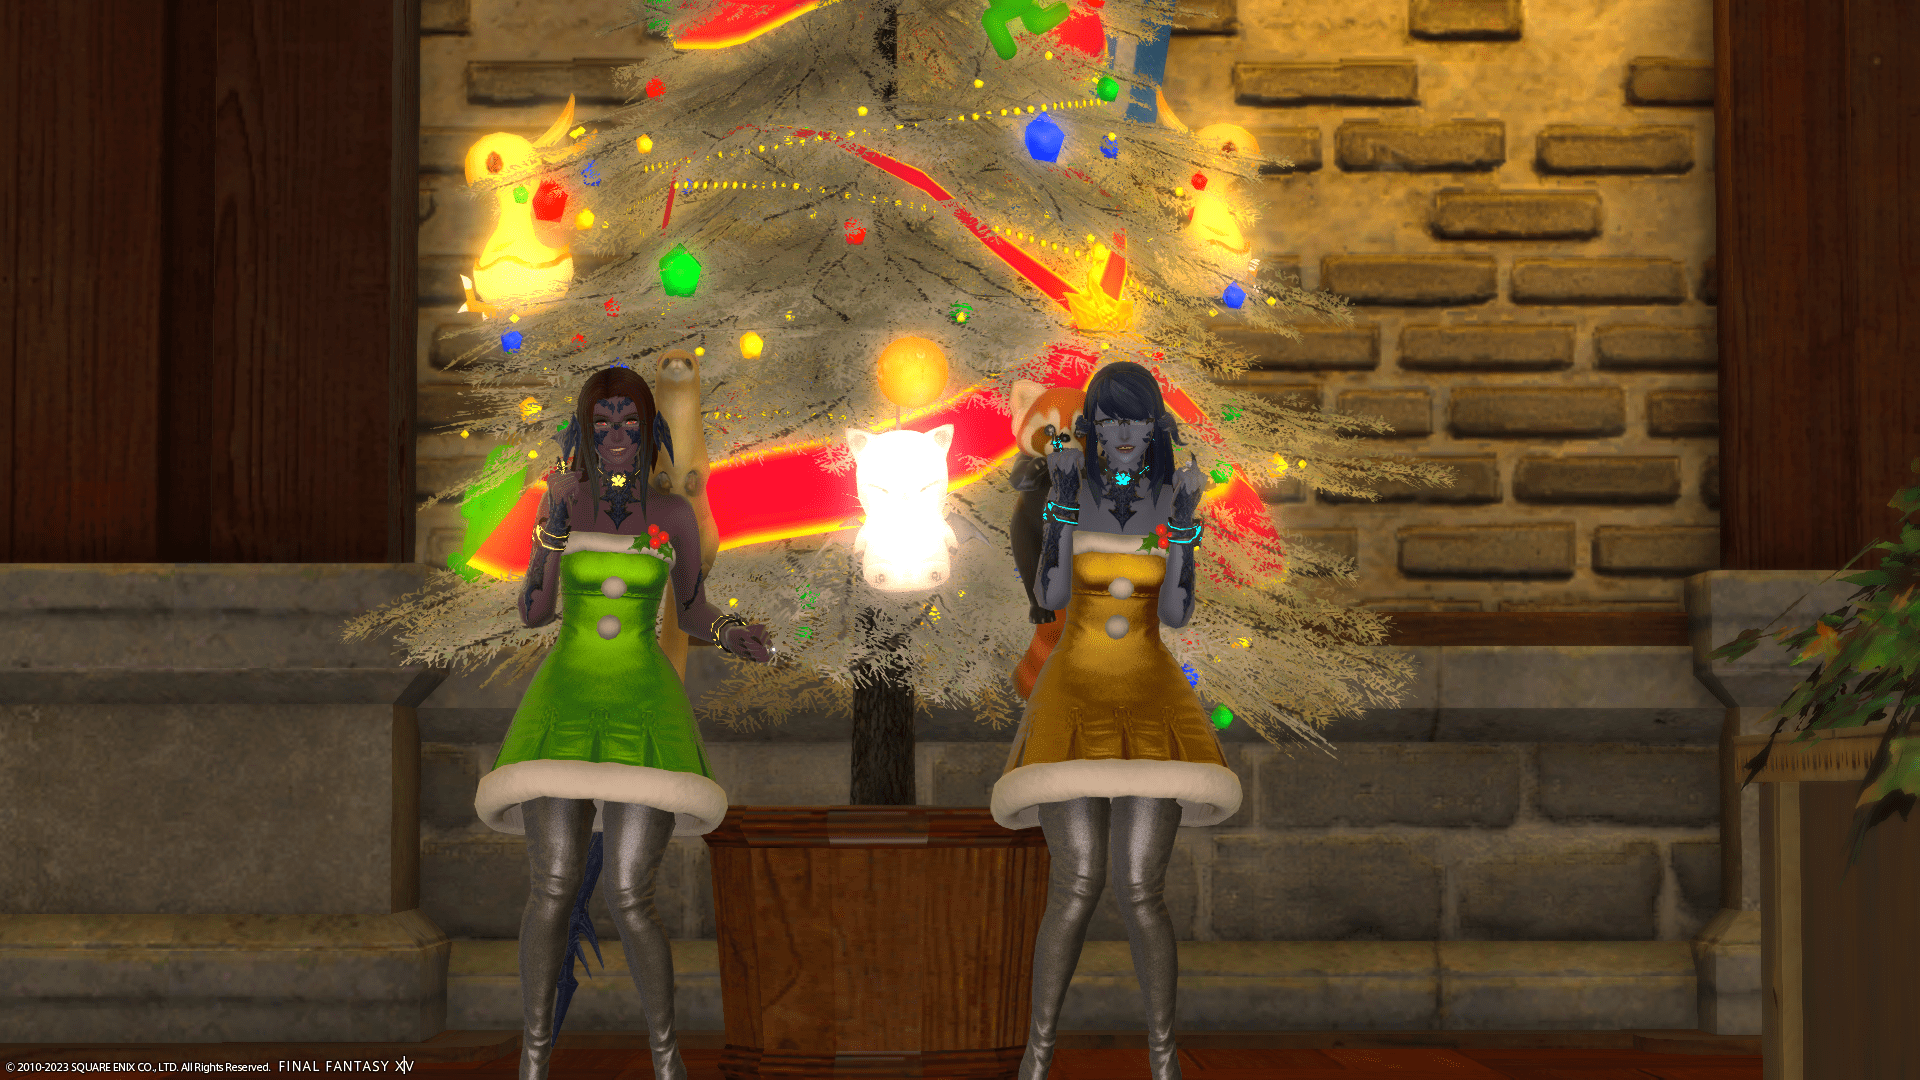 The Dragon Cousins in Winter Holiday dresses cheering happily in front of a silver decorated tree in Final Fantasy XIV.